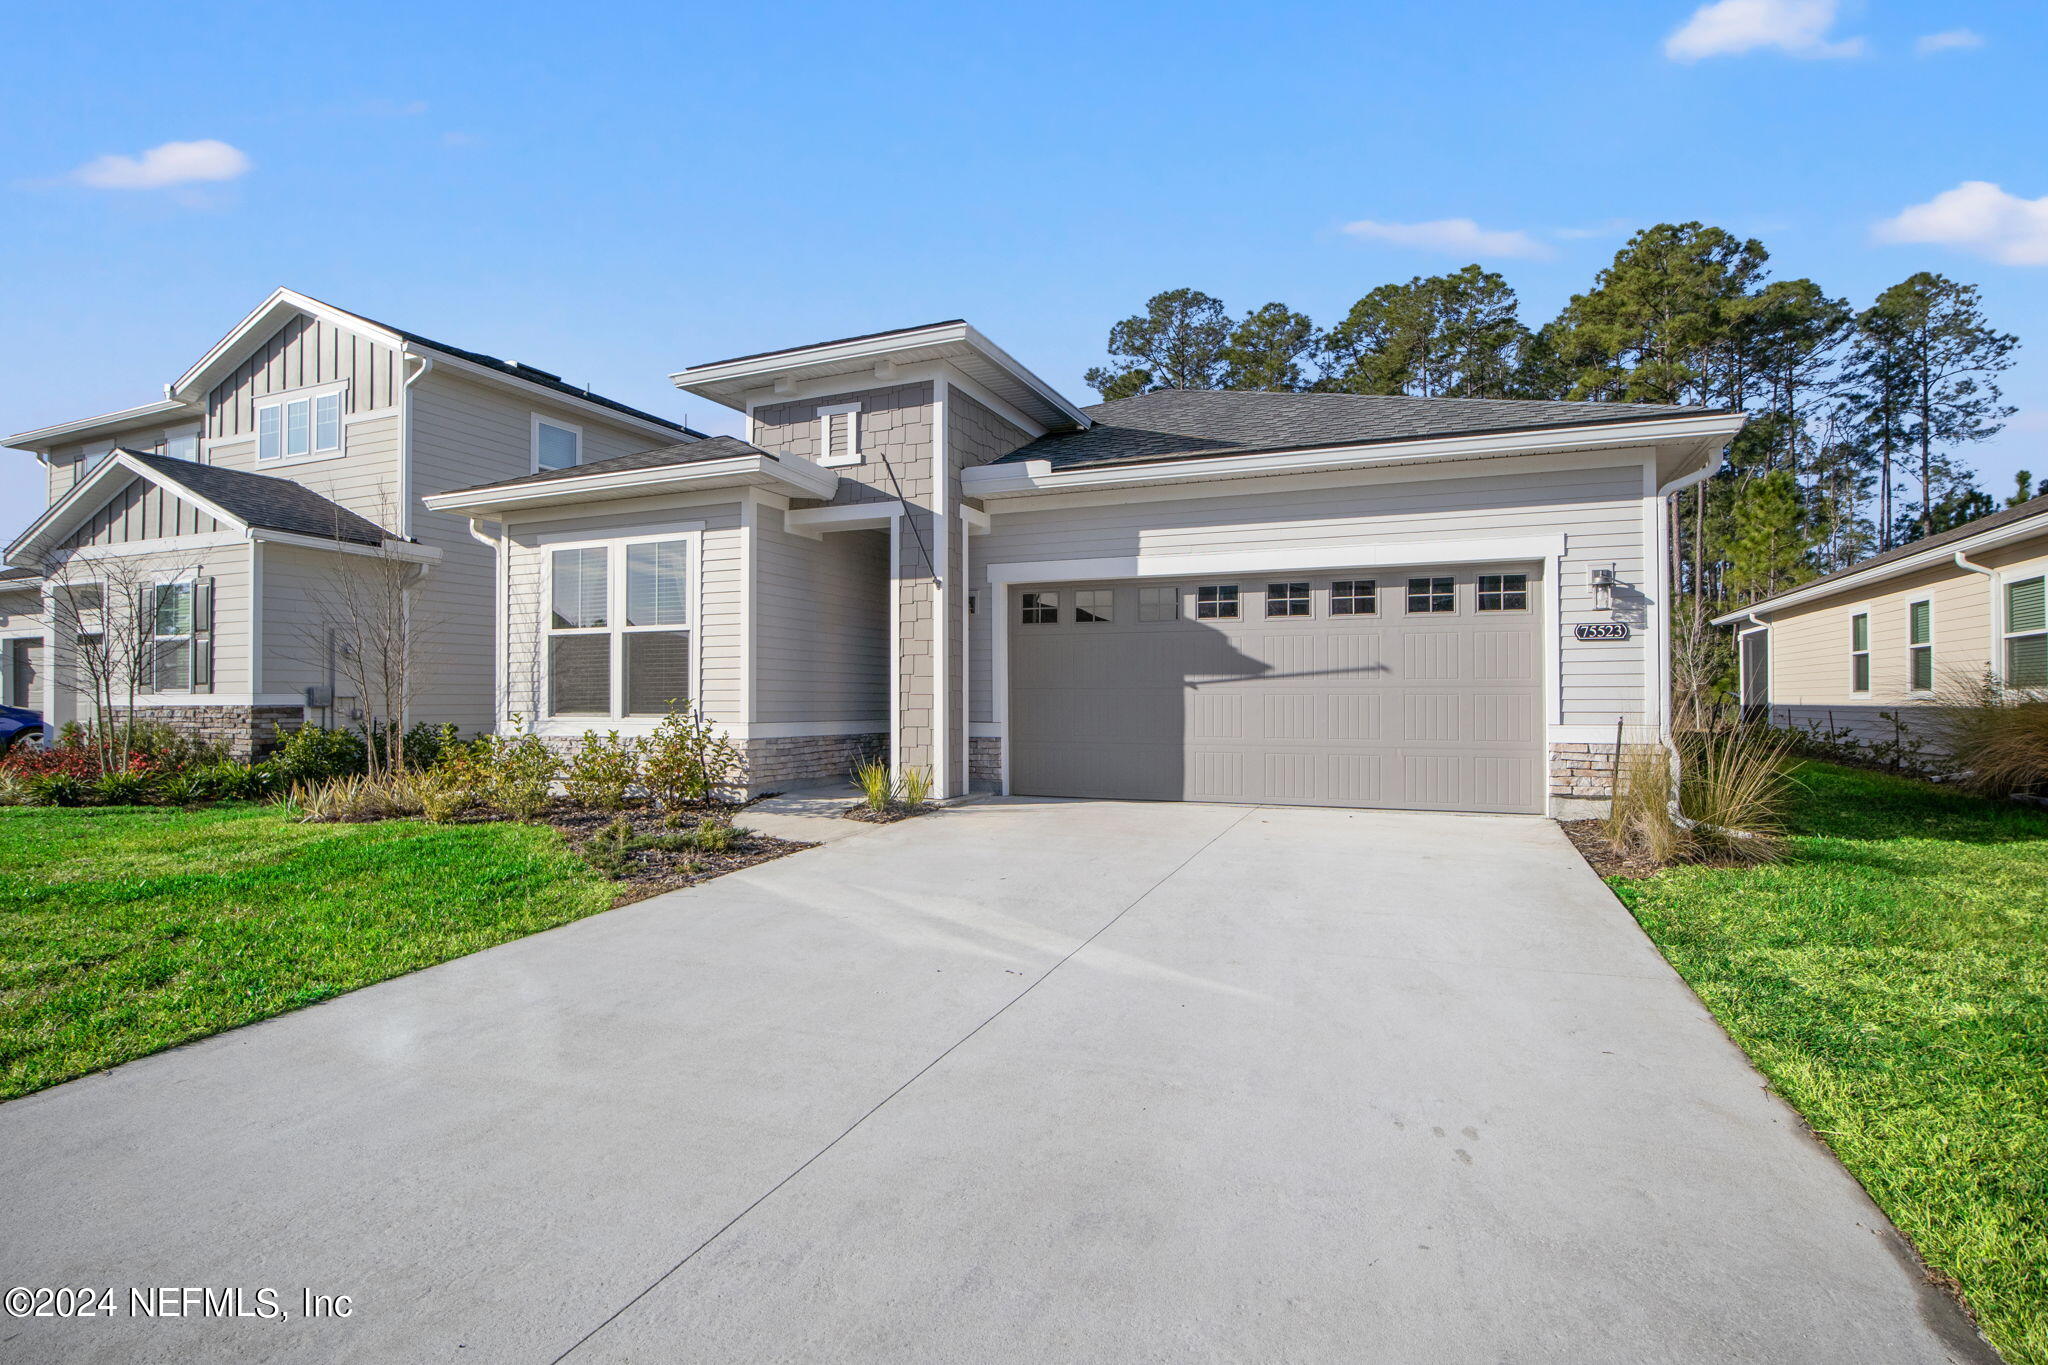 Yulee, FL home for sale located at 75523 Cloverwood Court, Yulee, FL 32097